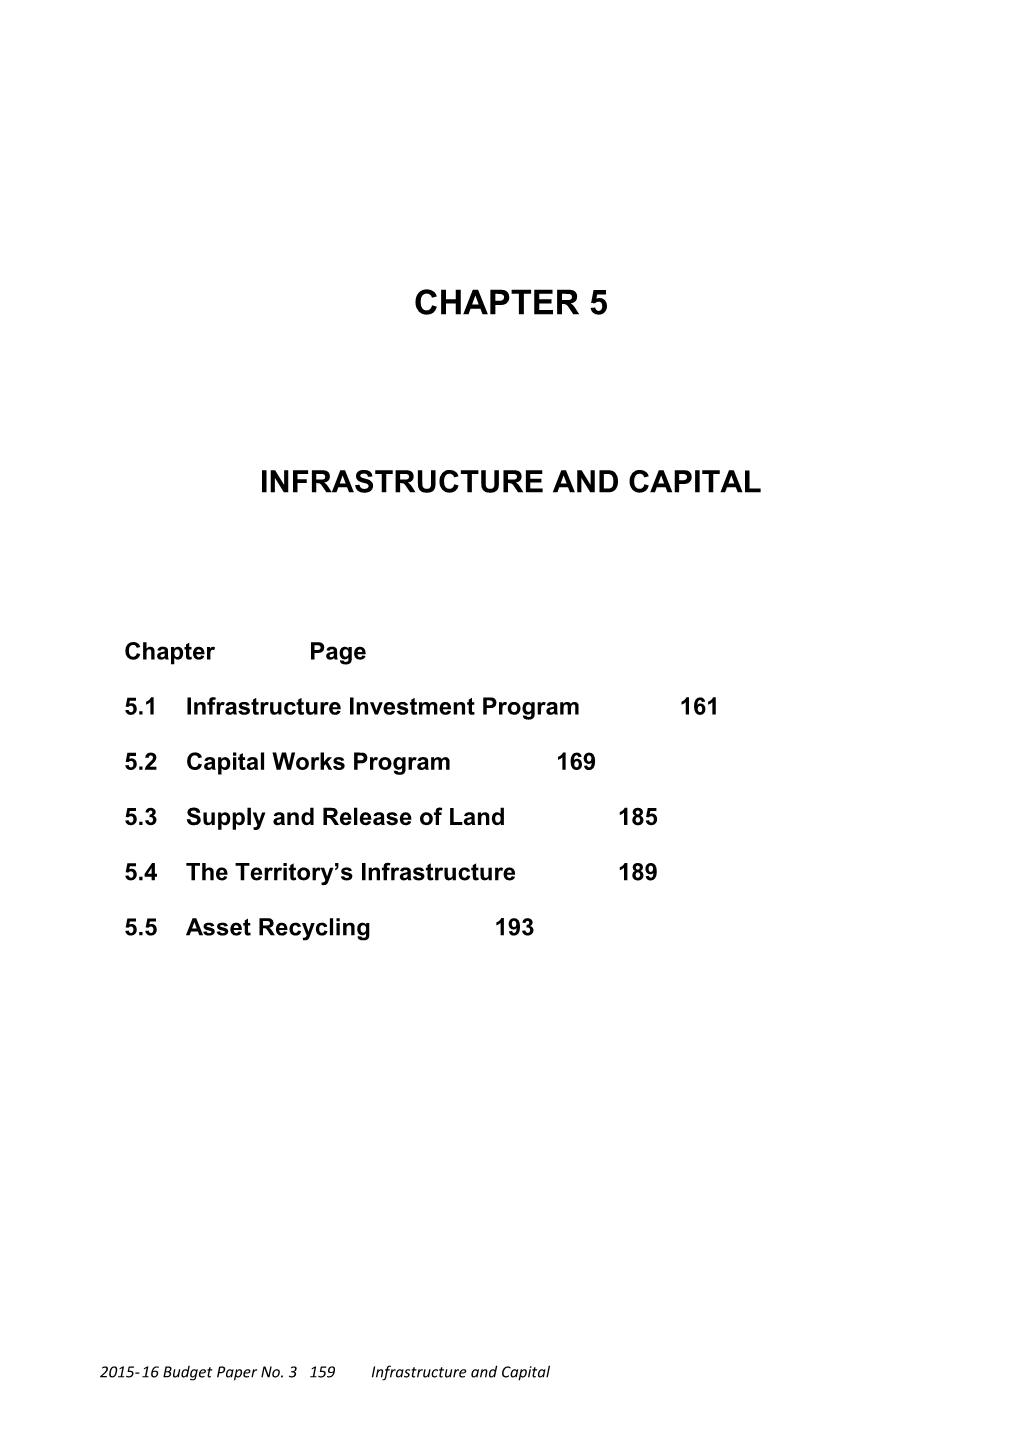 Infrastructure and Capital